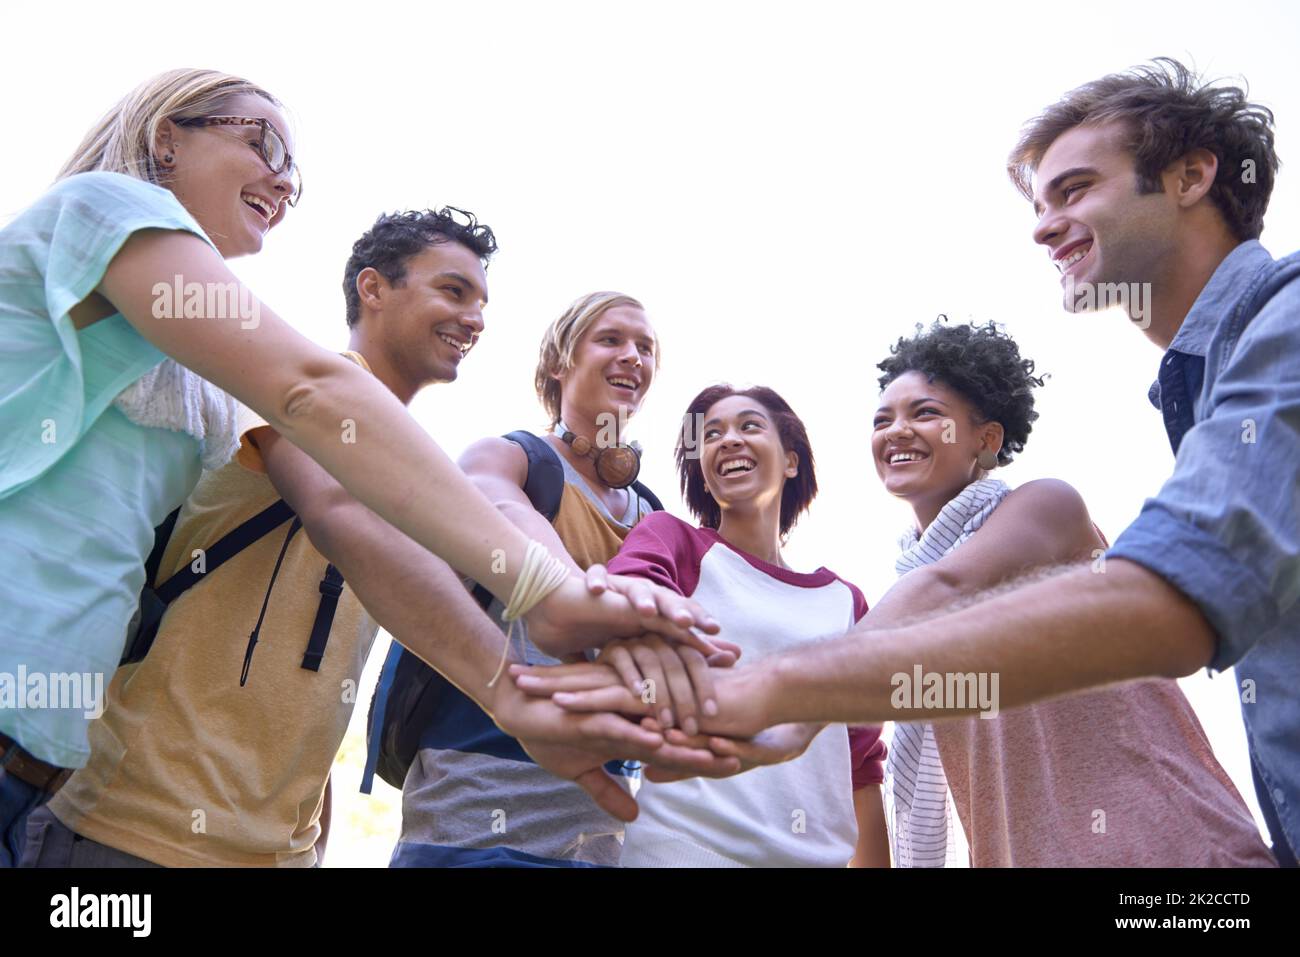 Motivating each other. Shot of a group of students putting their hands in a huddle. Stock Photo